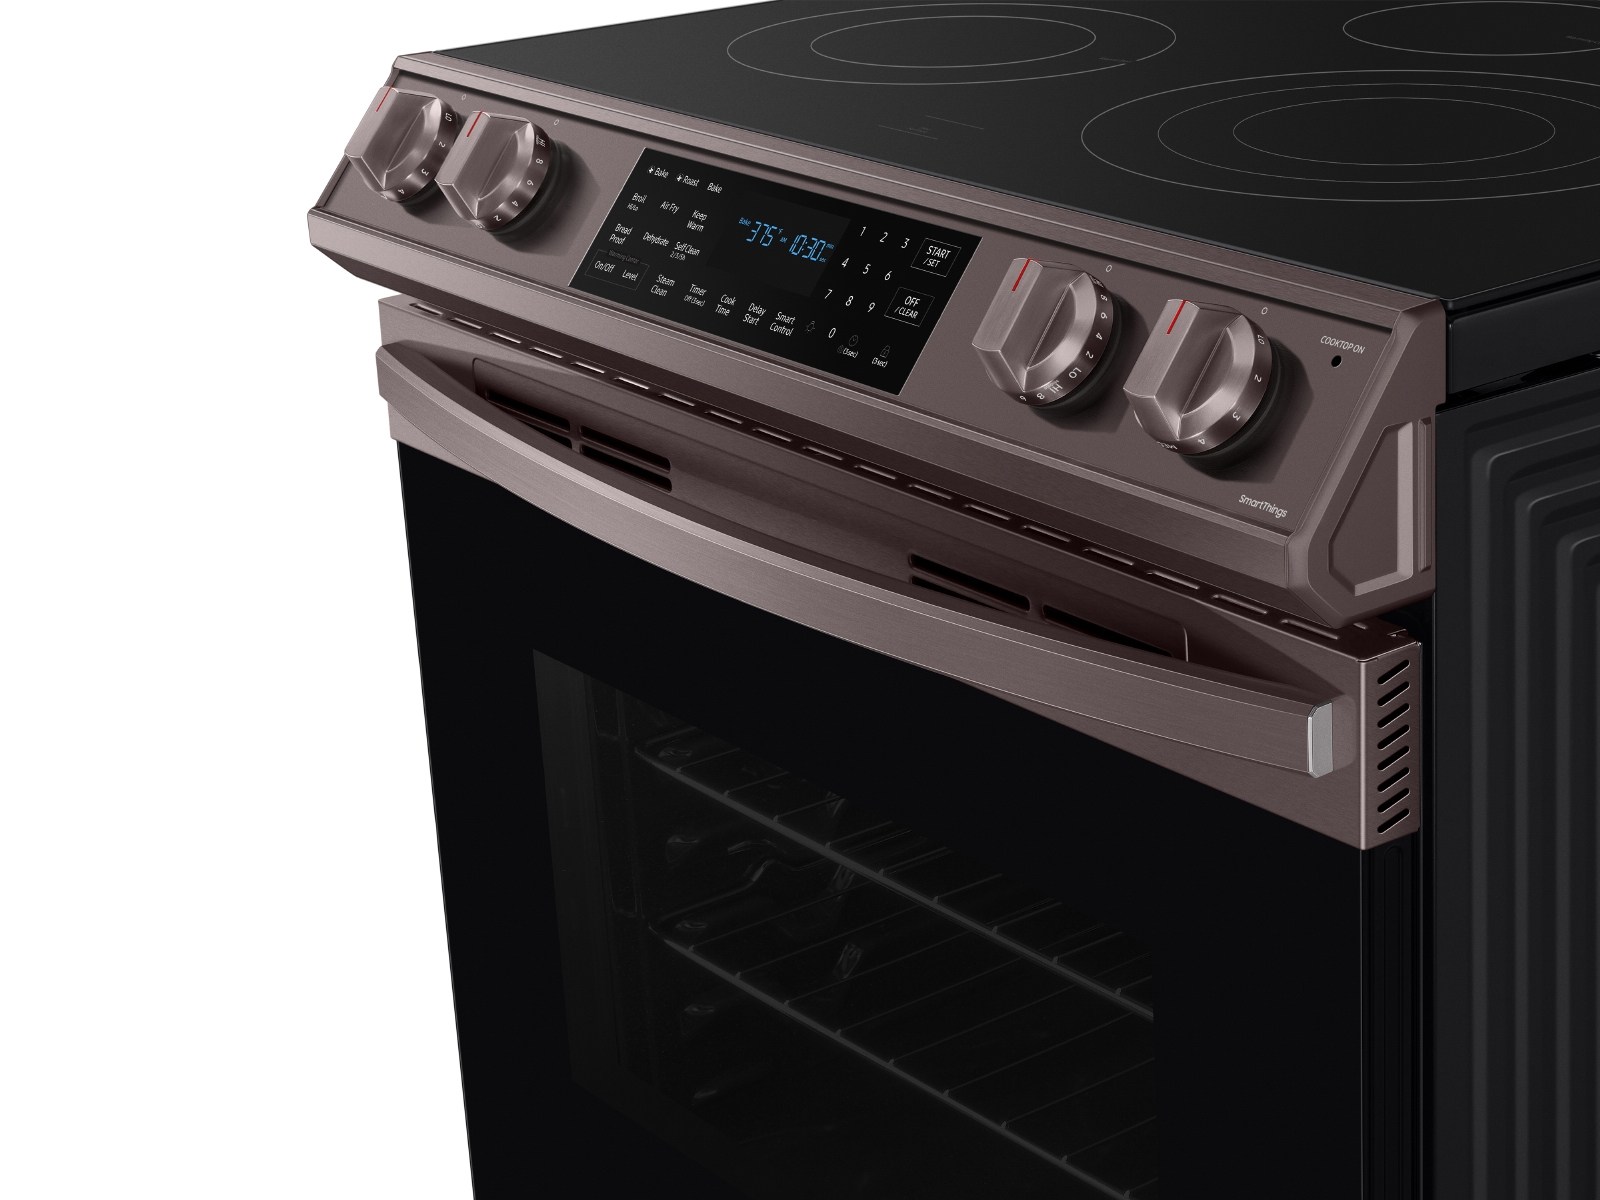 AIR FRYING CHICKEN, Samsung Electric Ranges